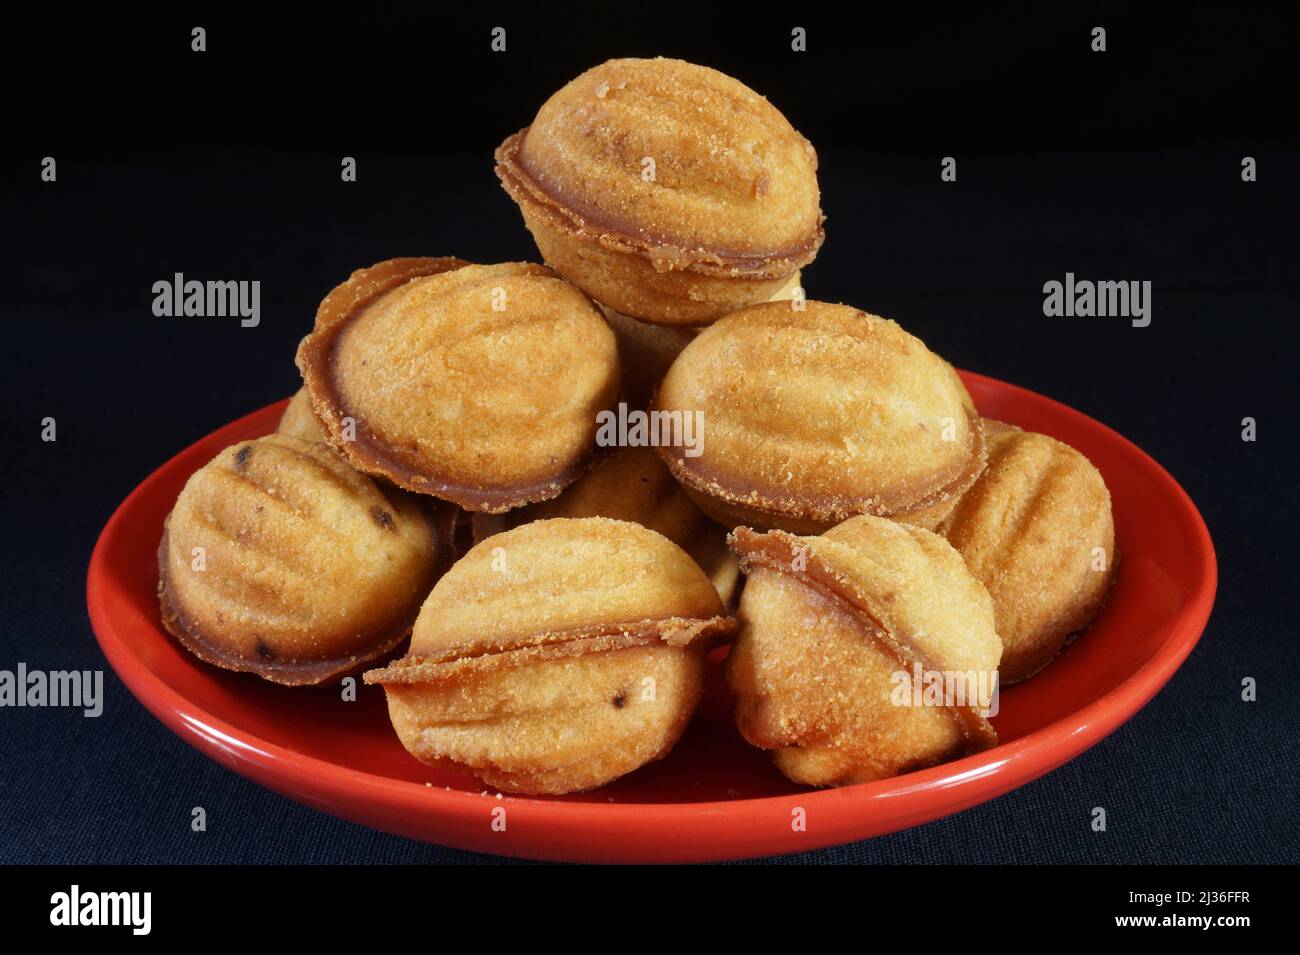 Pastry nuts with stuffing on the kitchen table, Food on a black background Stock Photo